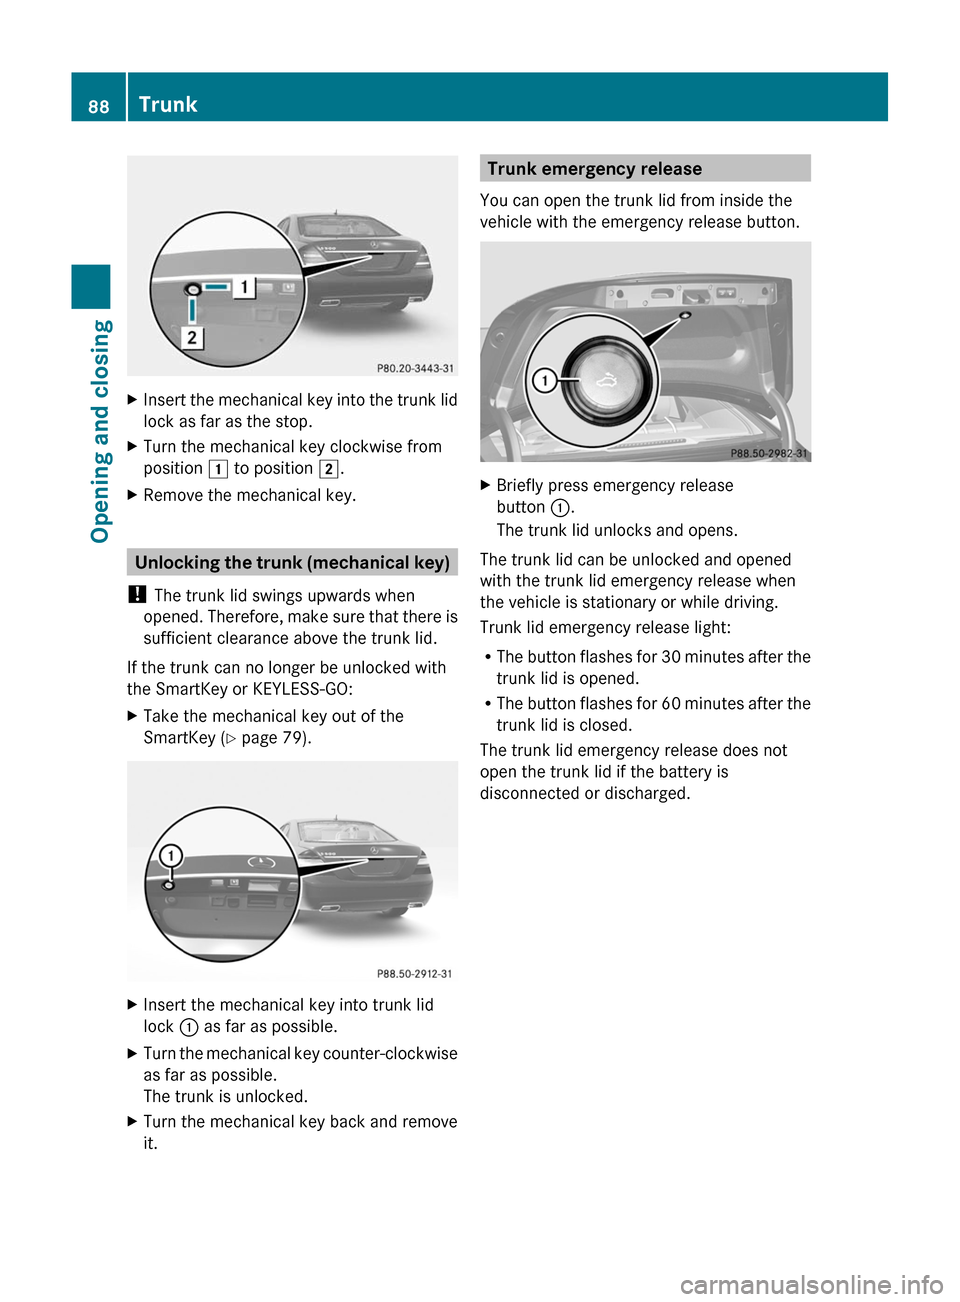 MERCEDES-BENZ S-Class 2011 W221 Owners Manual XInsert the mechanical key into the trunk lid
lock as far as the stop.
XTurn the mechanical key clockwise from
position 1 to position 2.
XRemove the mechanical key.
Unlocking the trunk (mechanical key